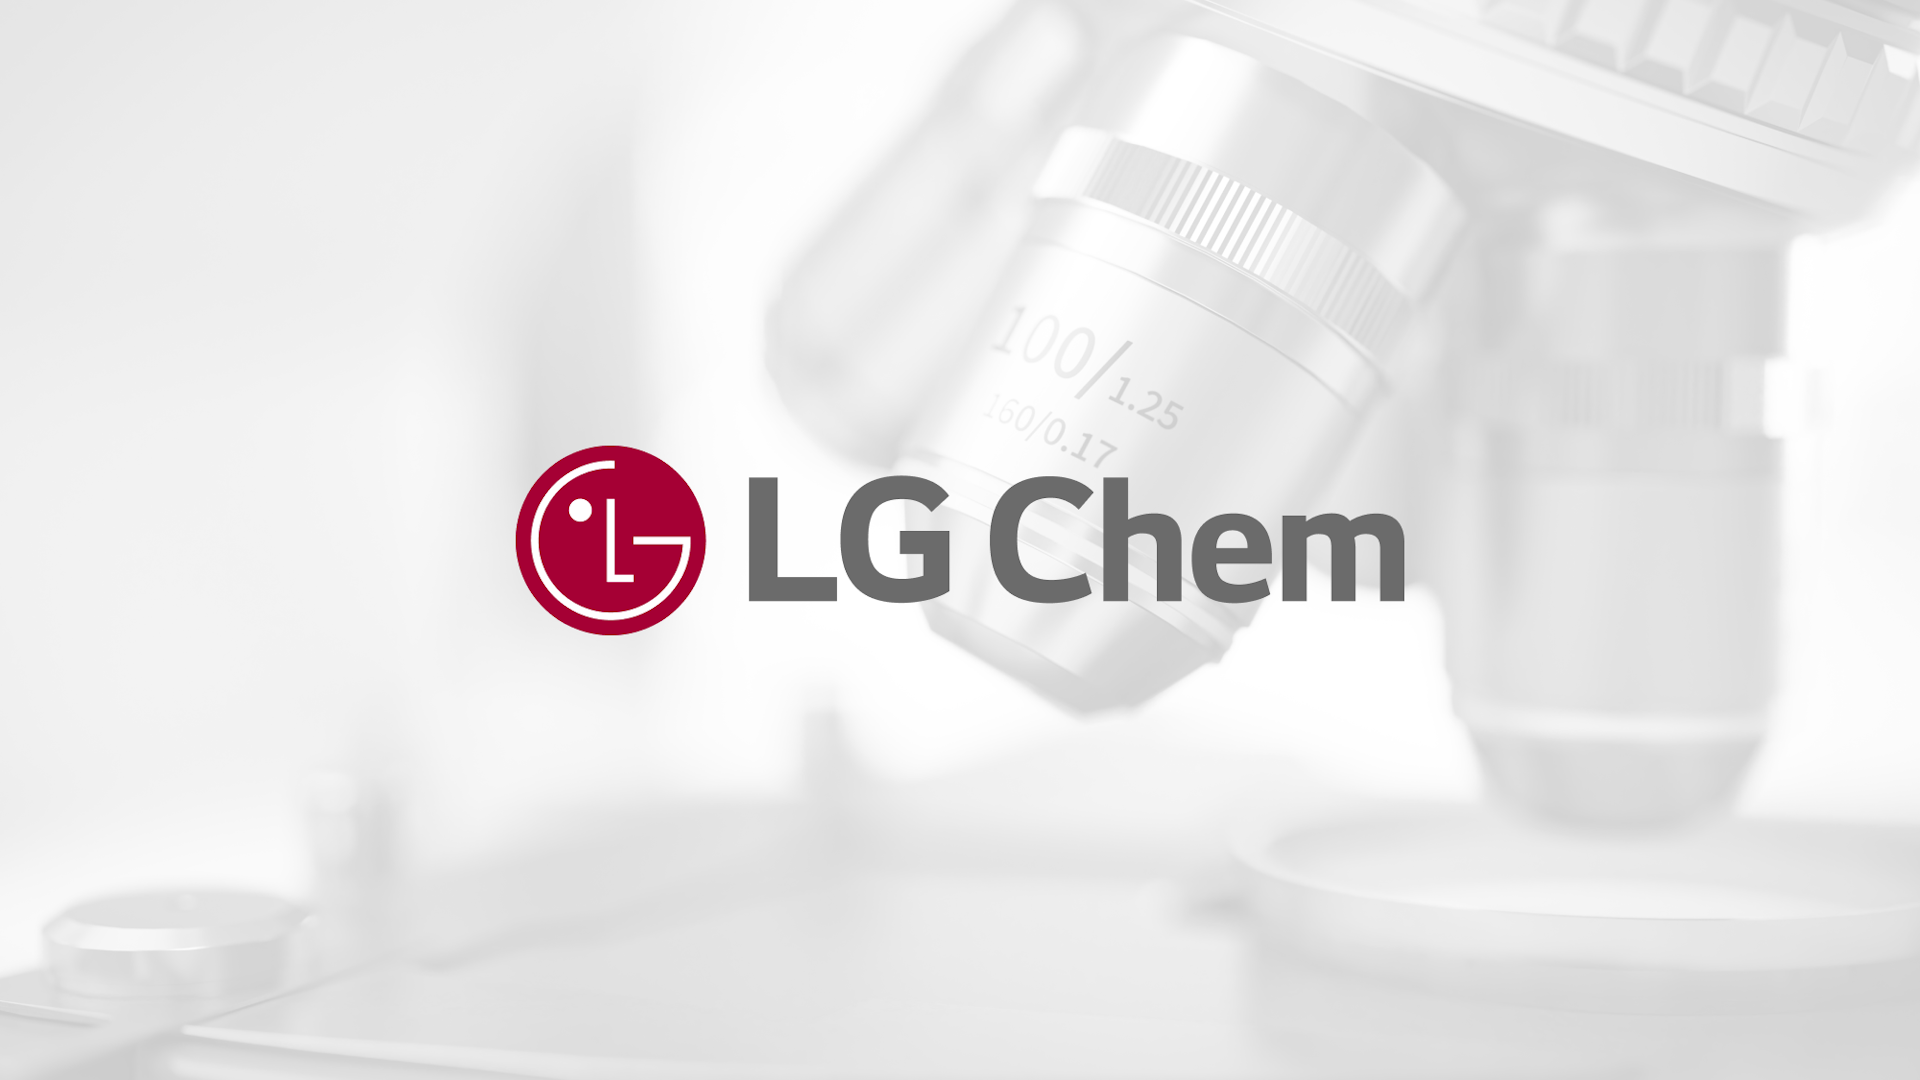 The DX capability system at LG Chem is designed to enhance employees' DX capabilities